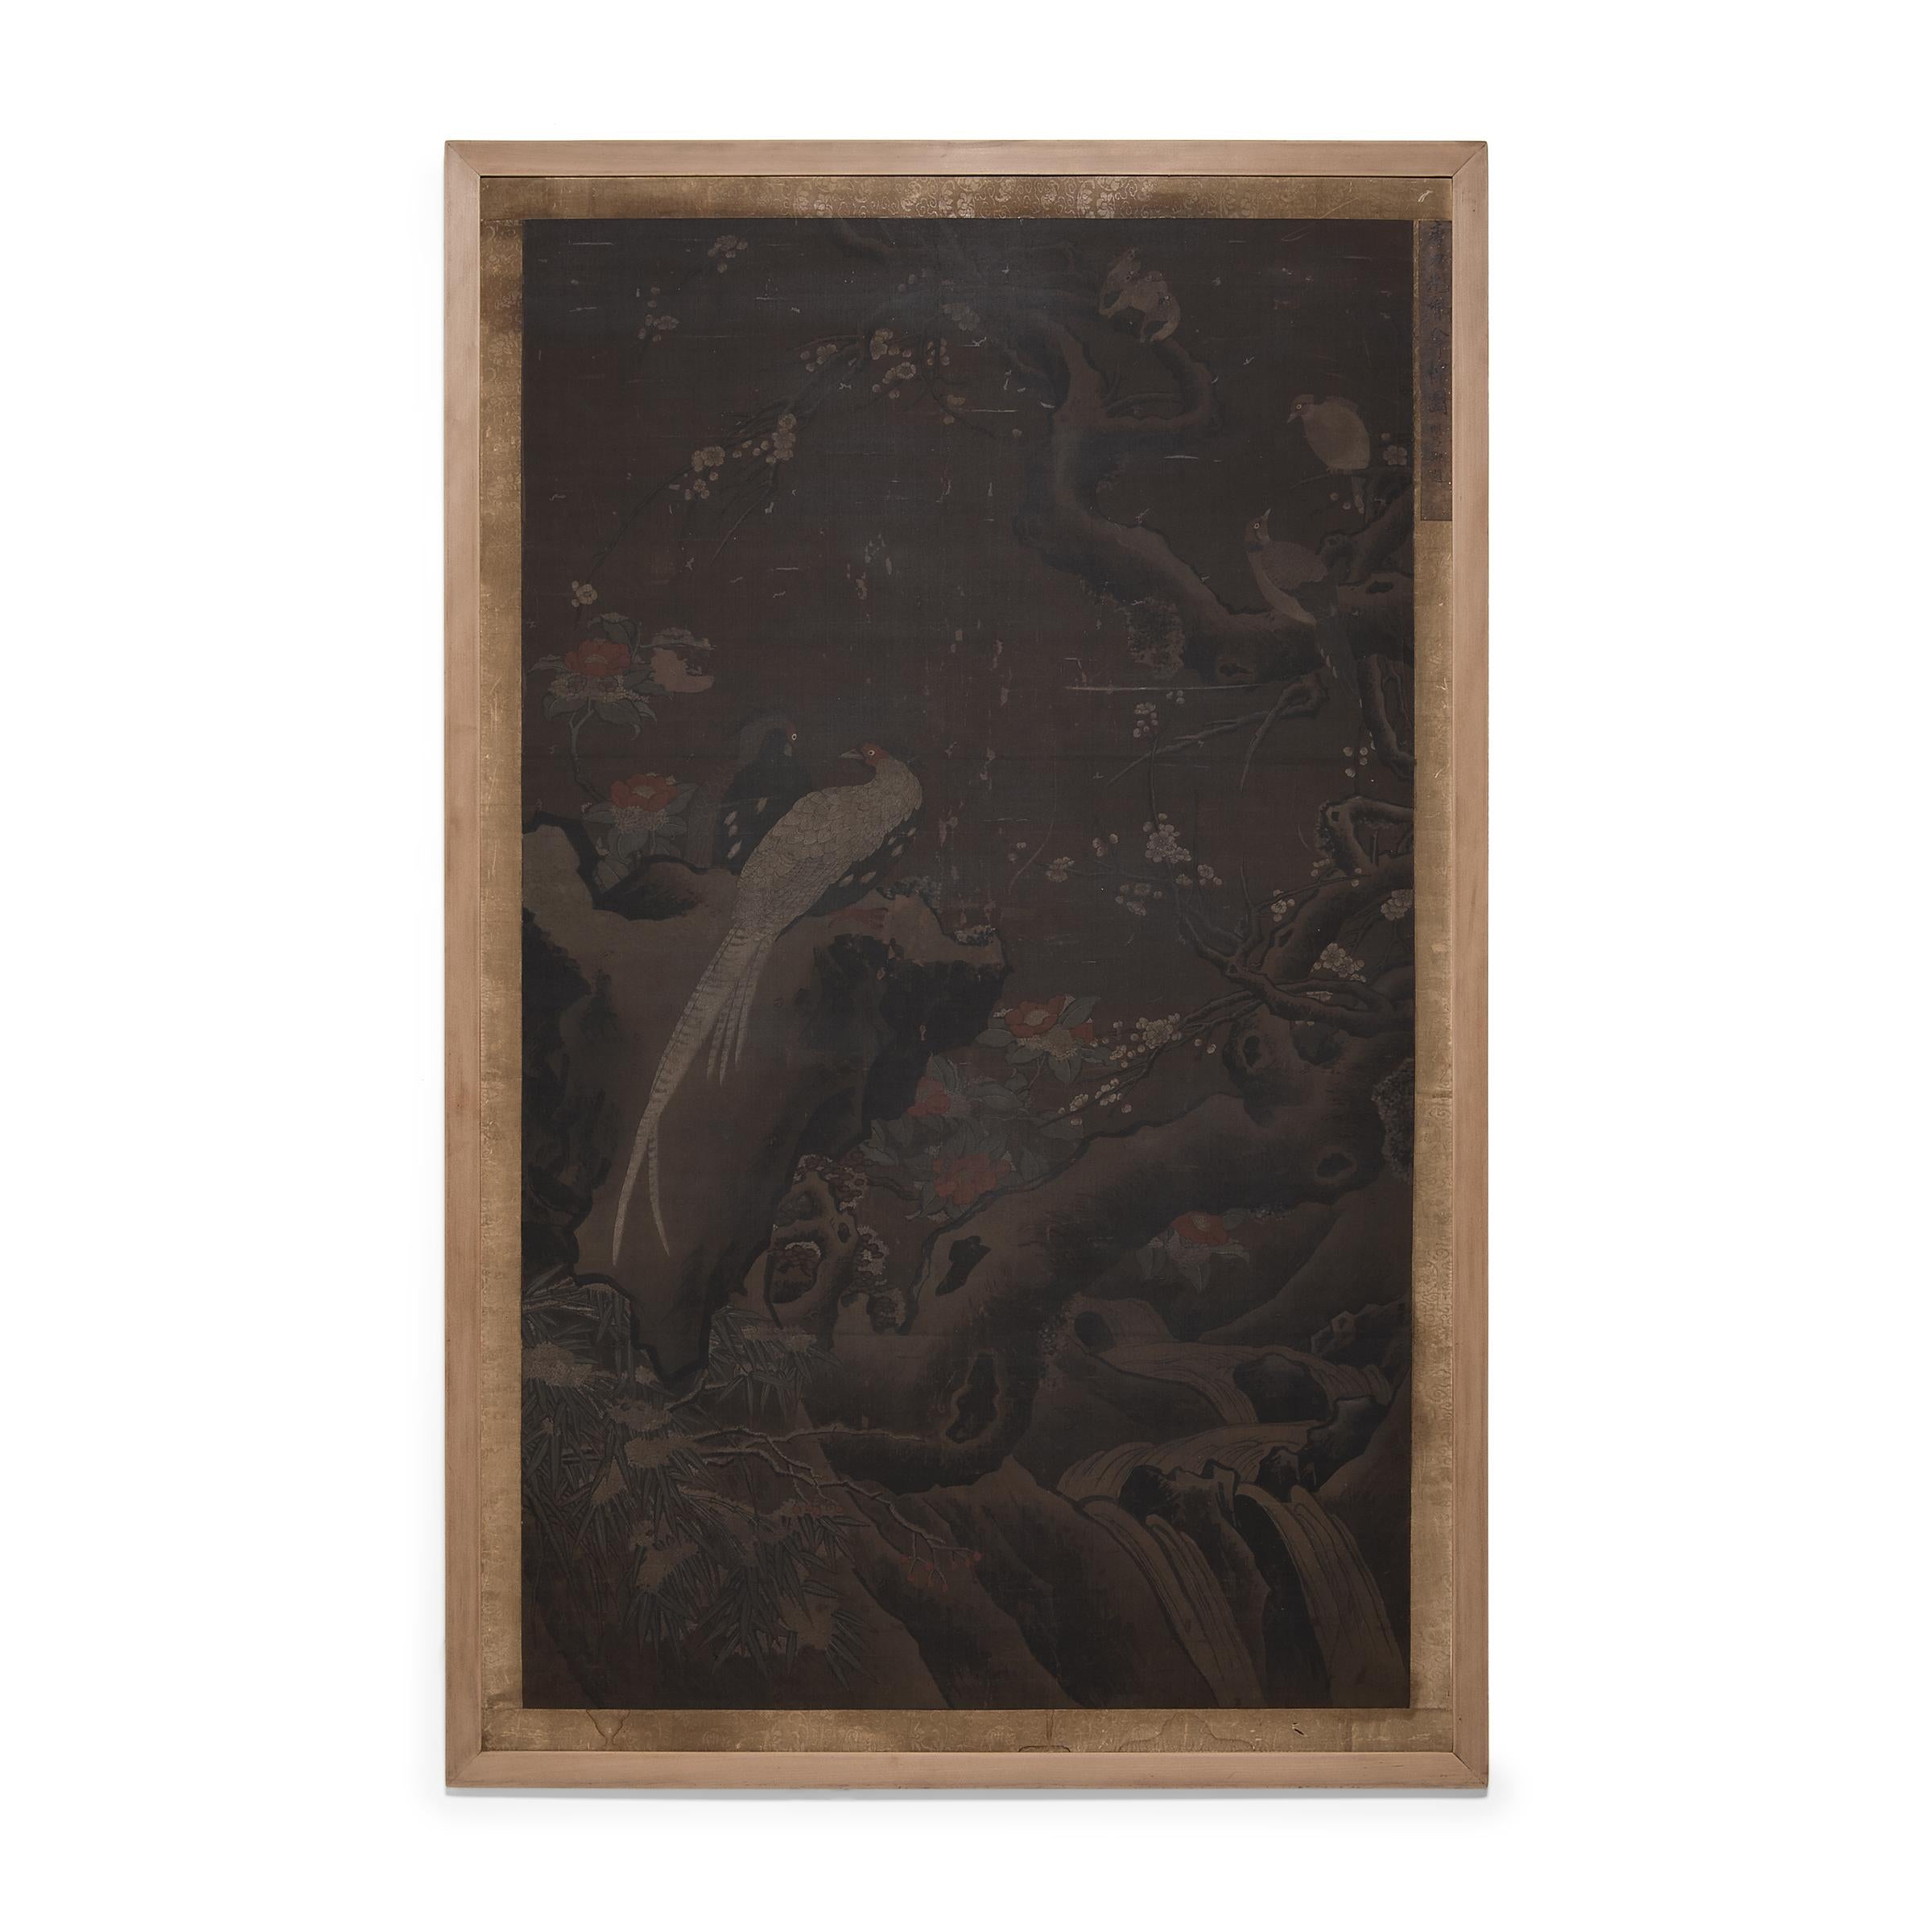 A grand example of Chinese calligraphy painting, this large bird-and-flower painting dates to the late Ming dynasty (1368-1644) and depicts a quiet winter scene of two silver pheasants surrounded by plum blossoms, camellia, and snowy bamboo.